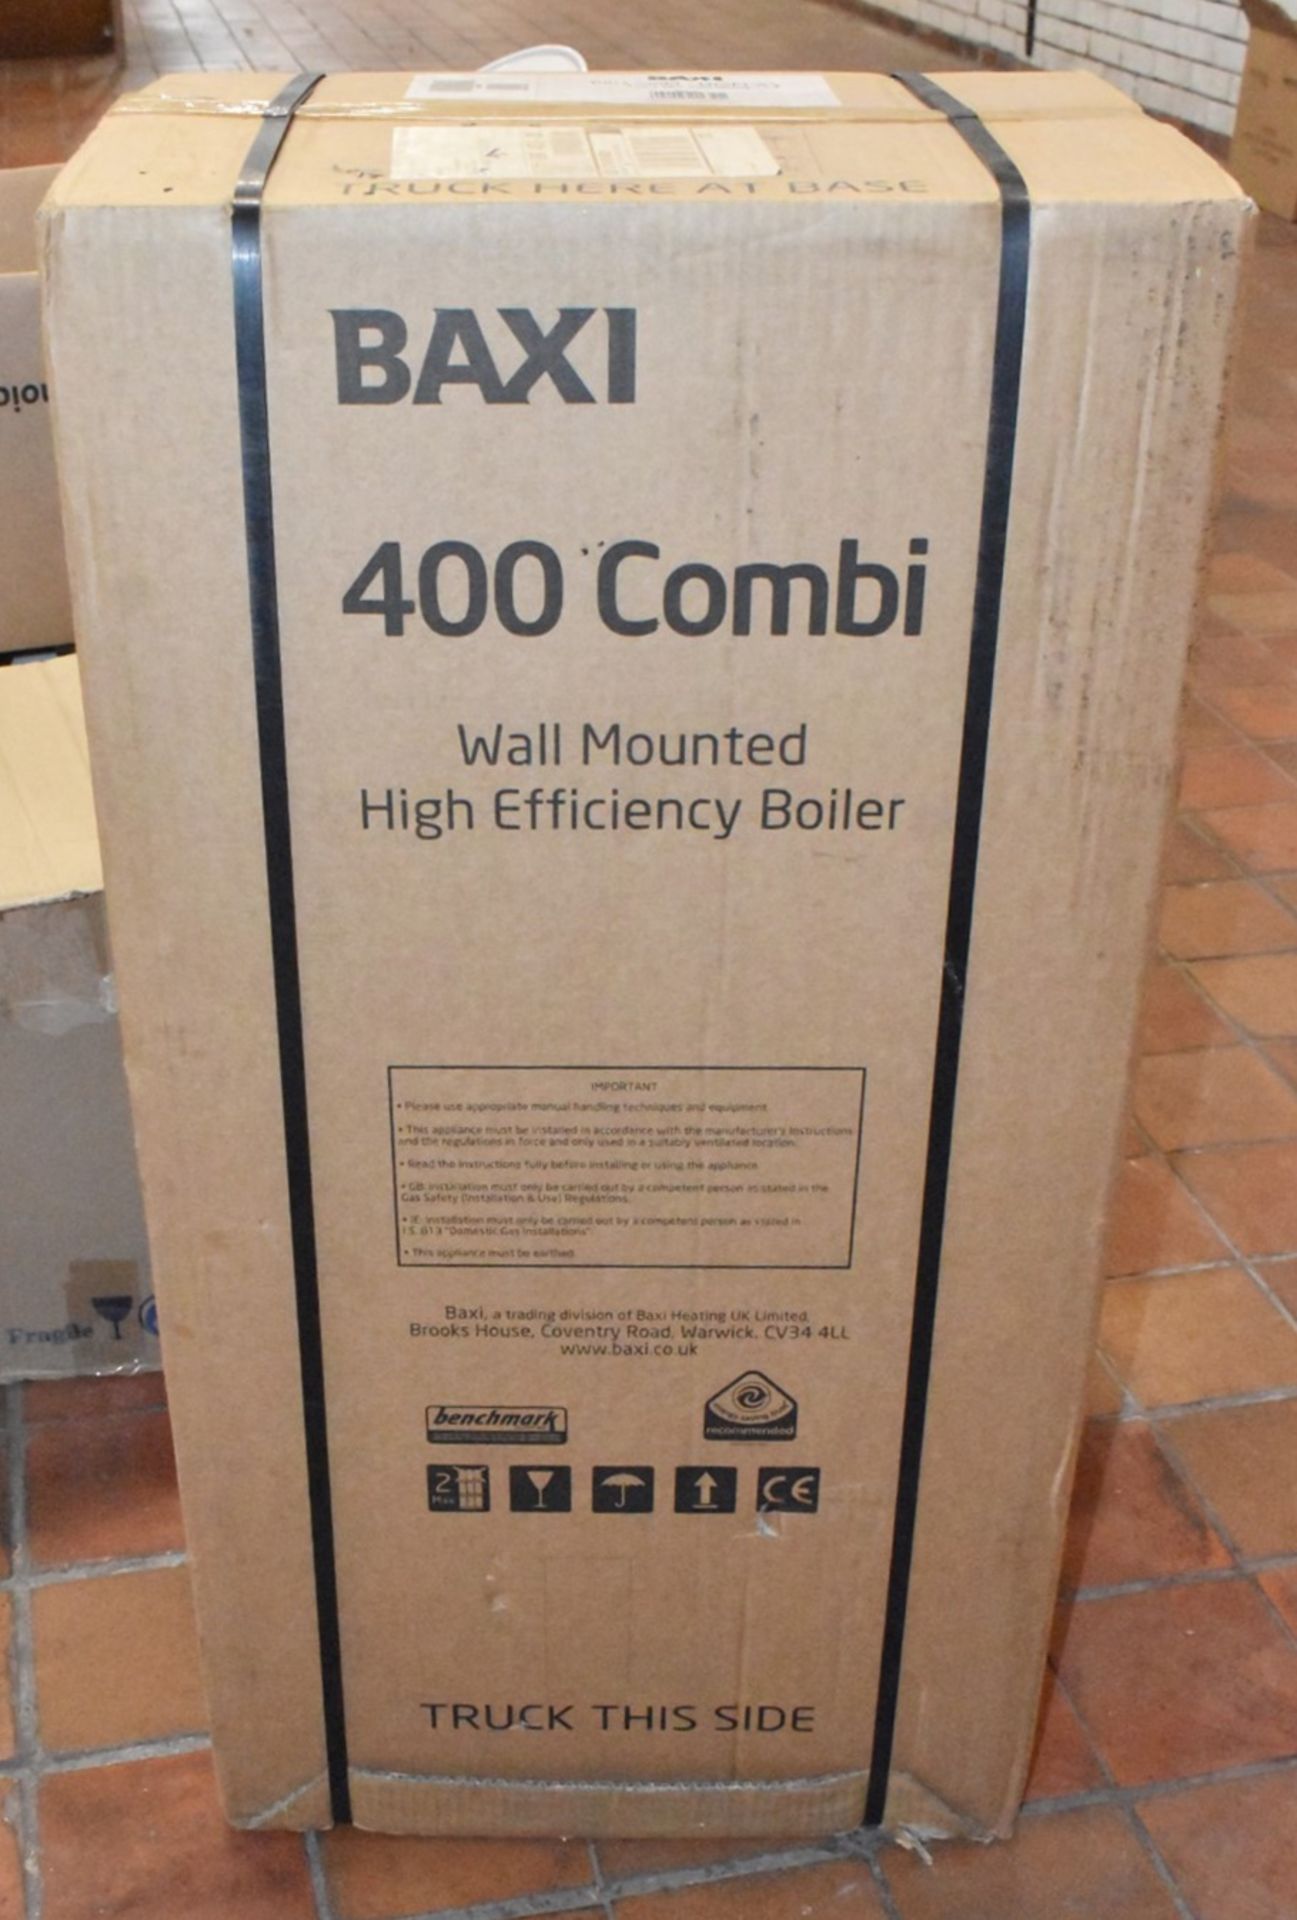 1 x BAXI 400 Wall Mounted Combi Boiler - Dummy Display Item - New and Sealed - Image 2 of 3